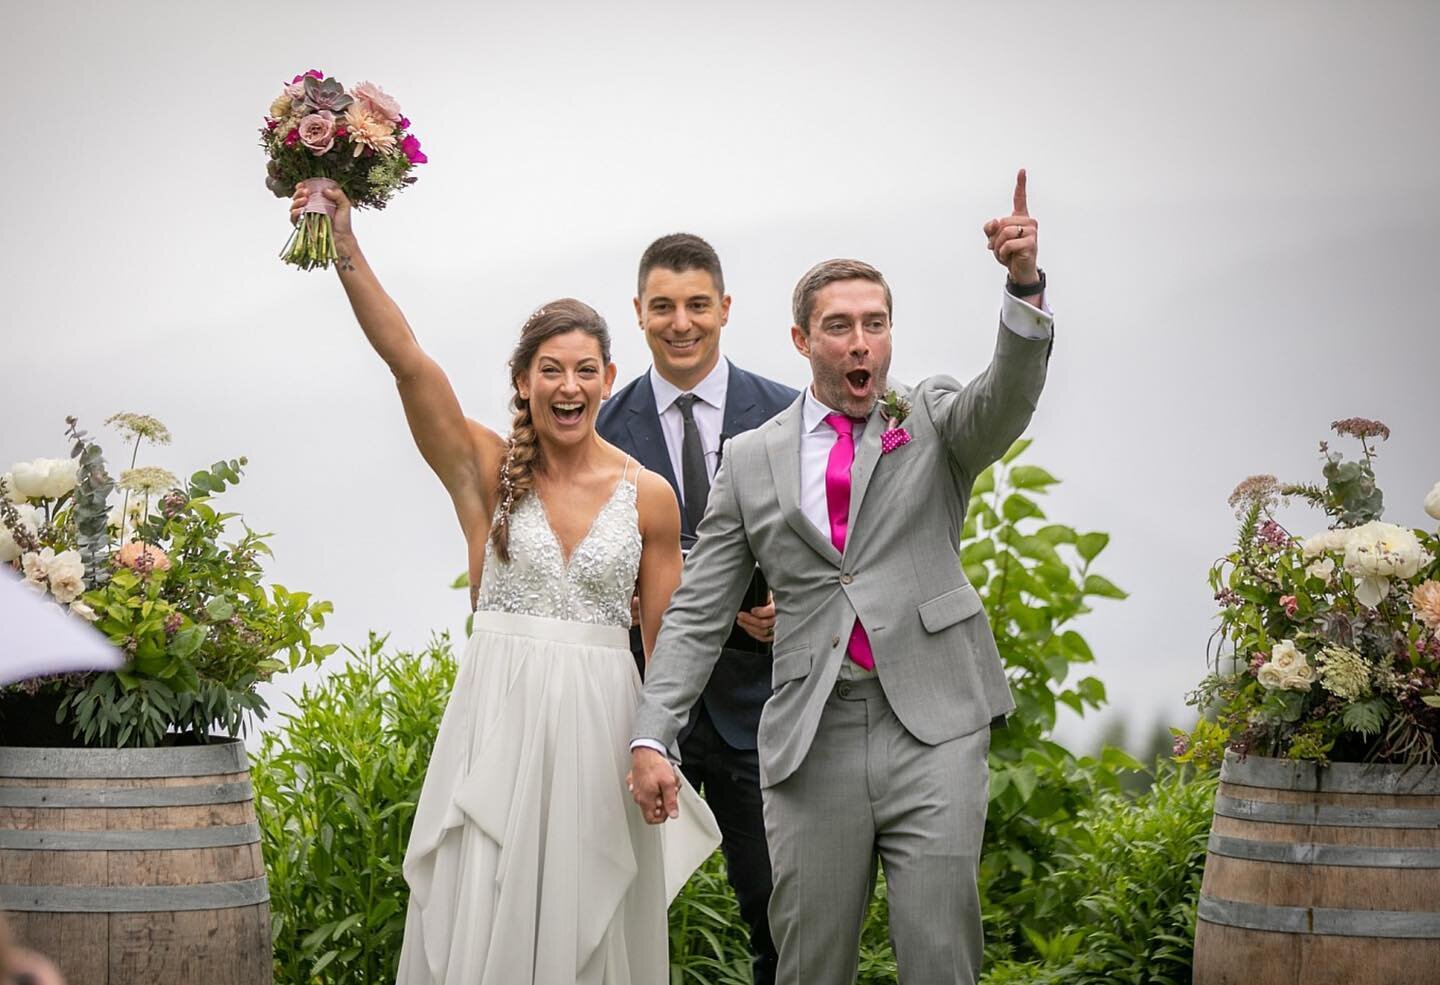 Heading into the busiest part of the wedding season like&hellip; 👏 This photo says it all! When you&rsquo;ve had to postpone and adjust and compromise, THIS right here makes it all worth it in the end. Here&rsquo;s to our 2020/2021 couples making th